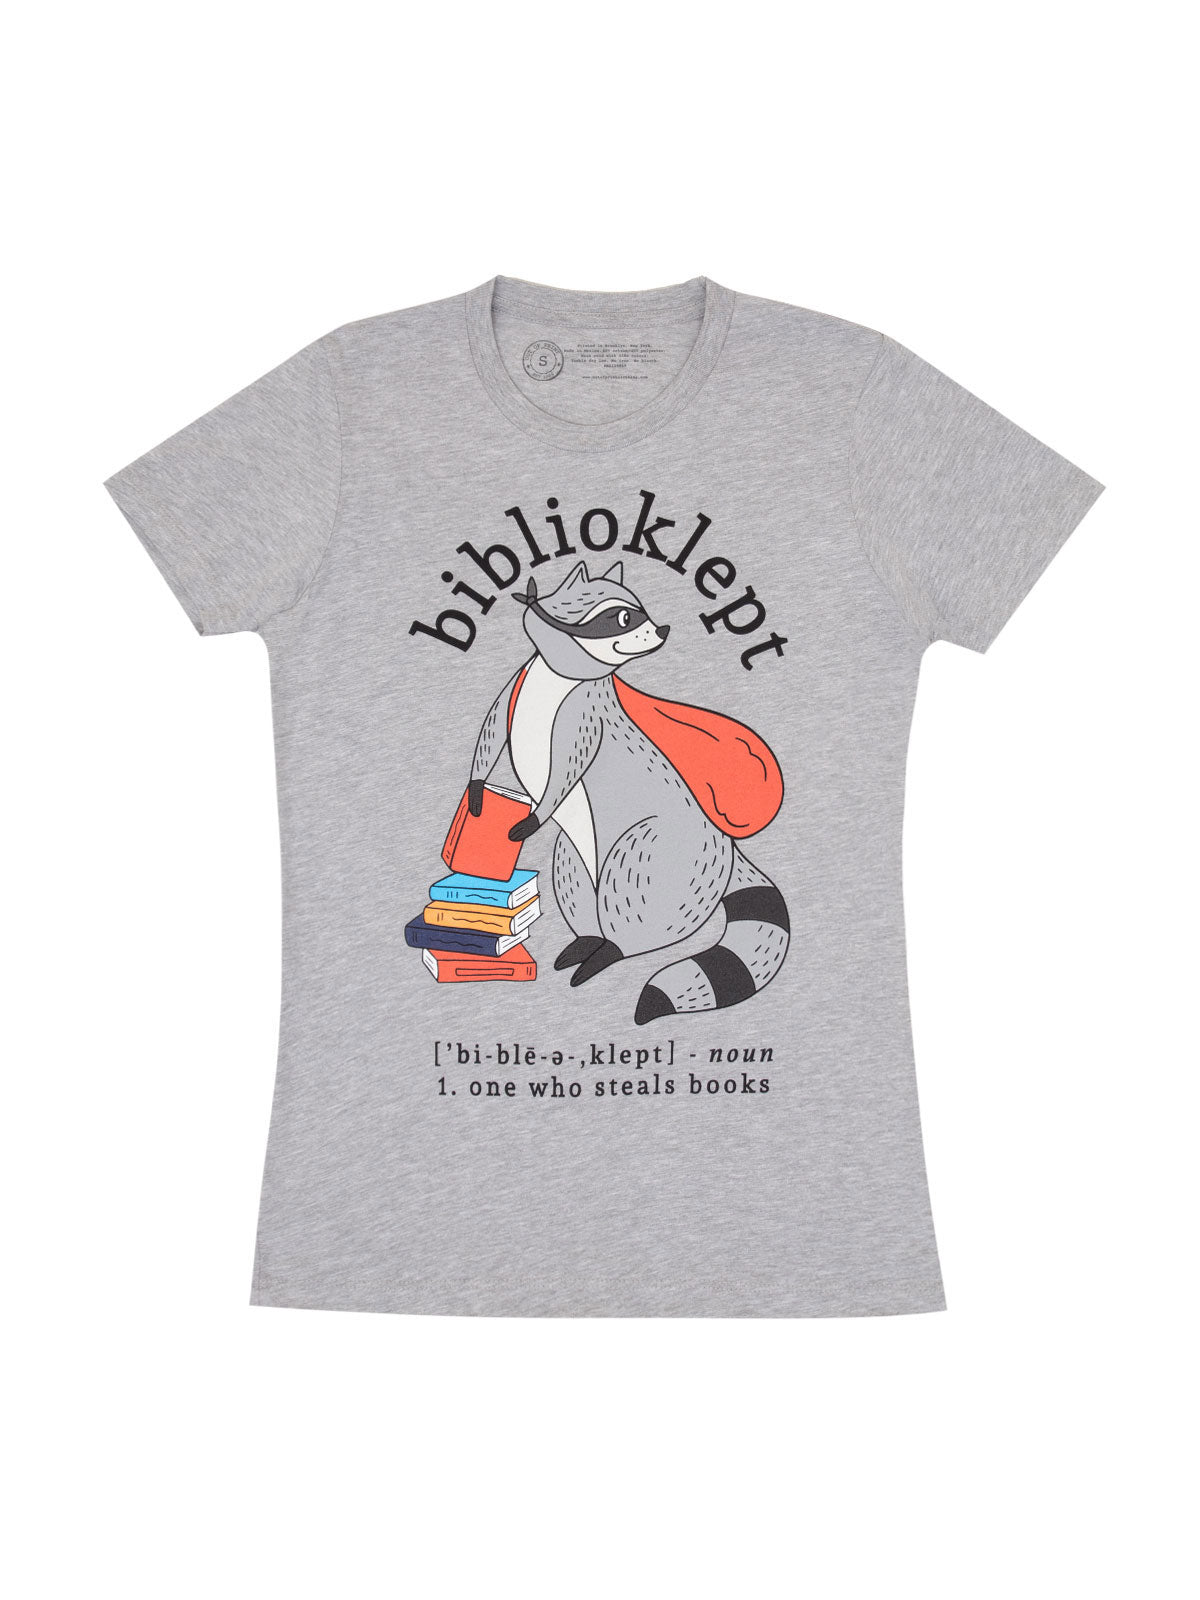 Animal-Inspired Book Tees